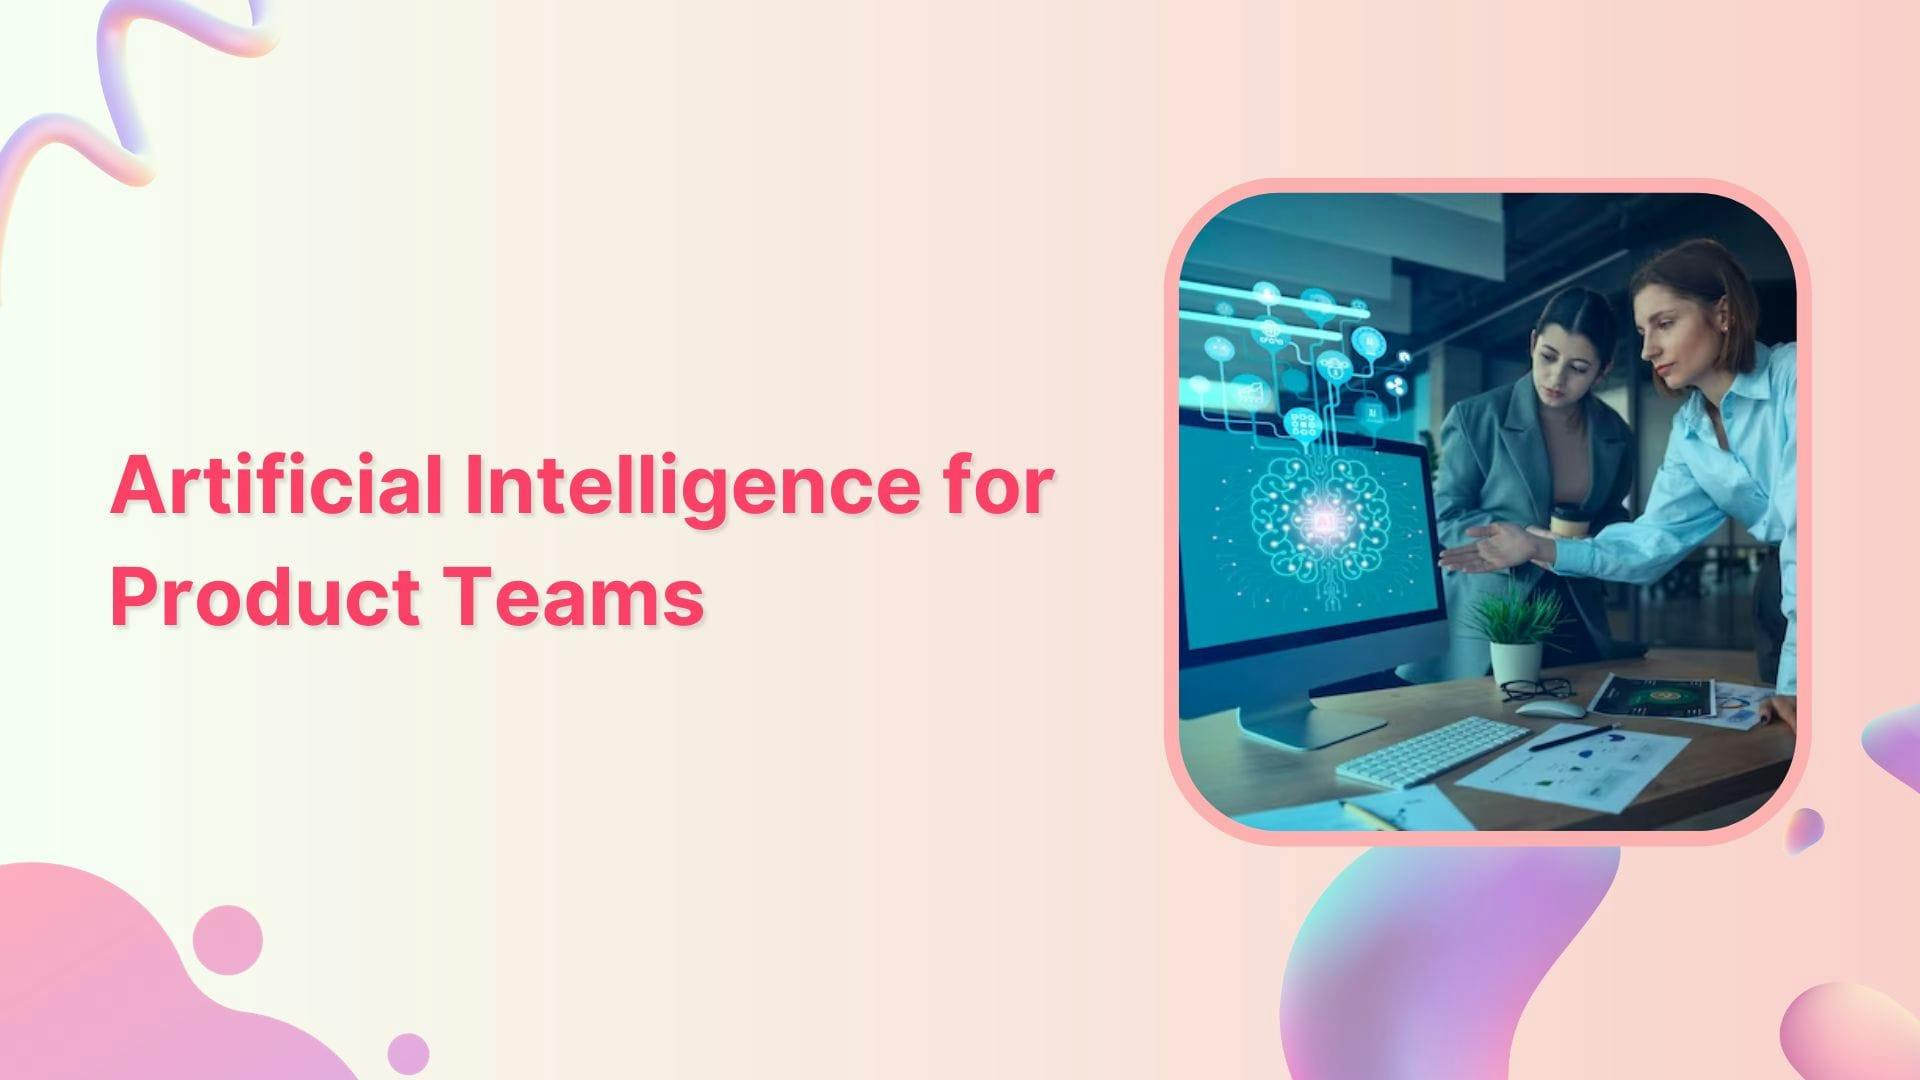 What Does Artificial Intelligence Mean for Product Teams?